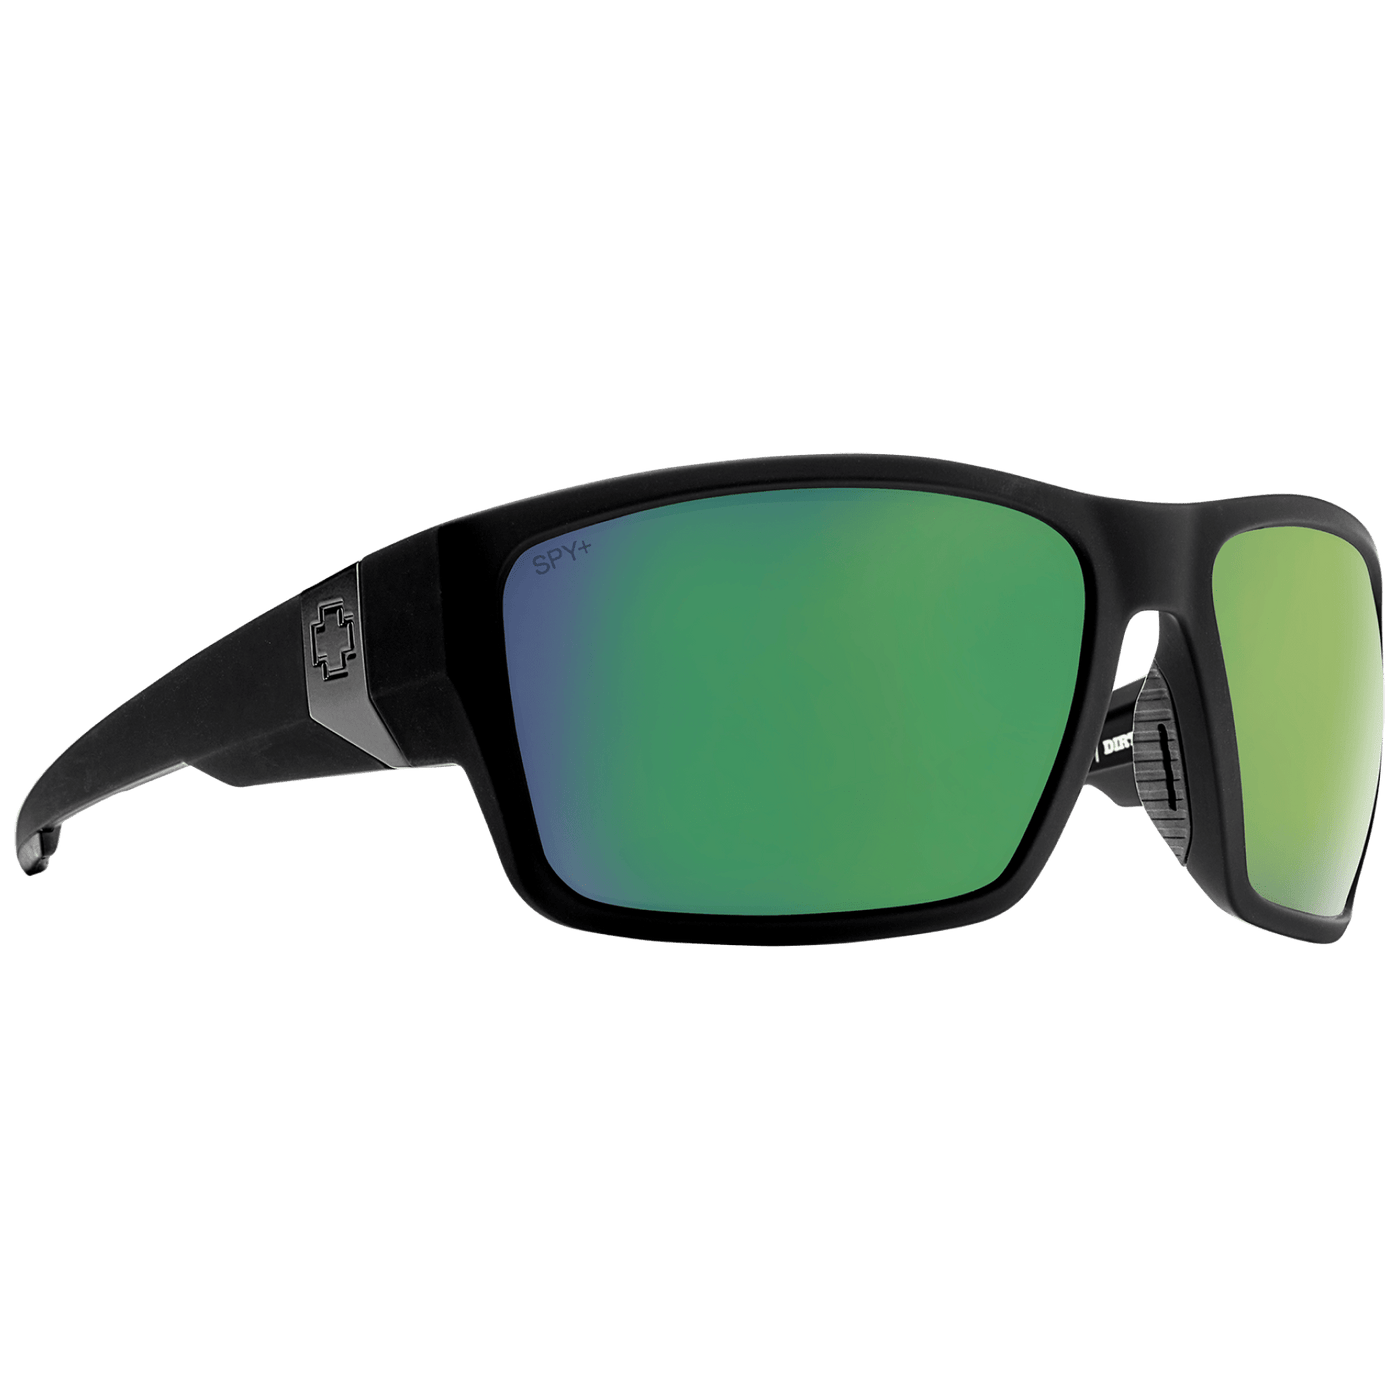 SPY DIRTY MO TECH Sunglasses - Green 8Lines Shop - Fast Shipping